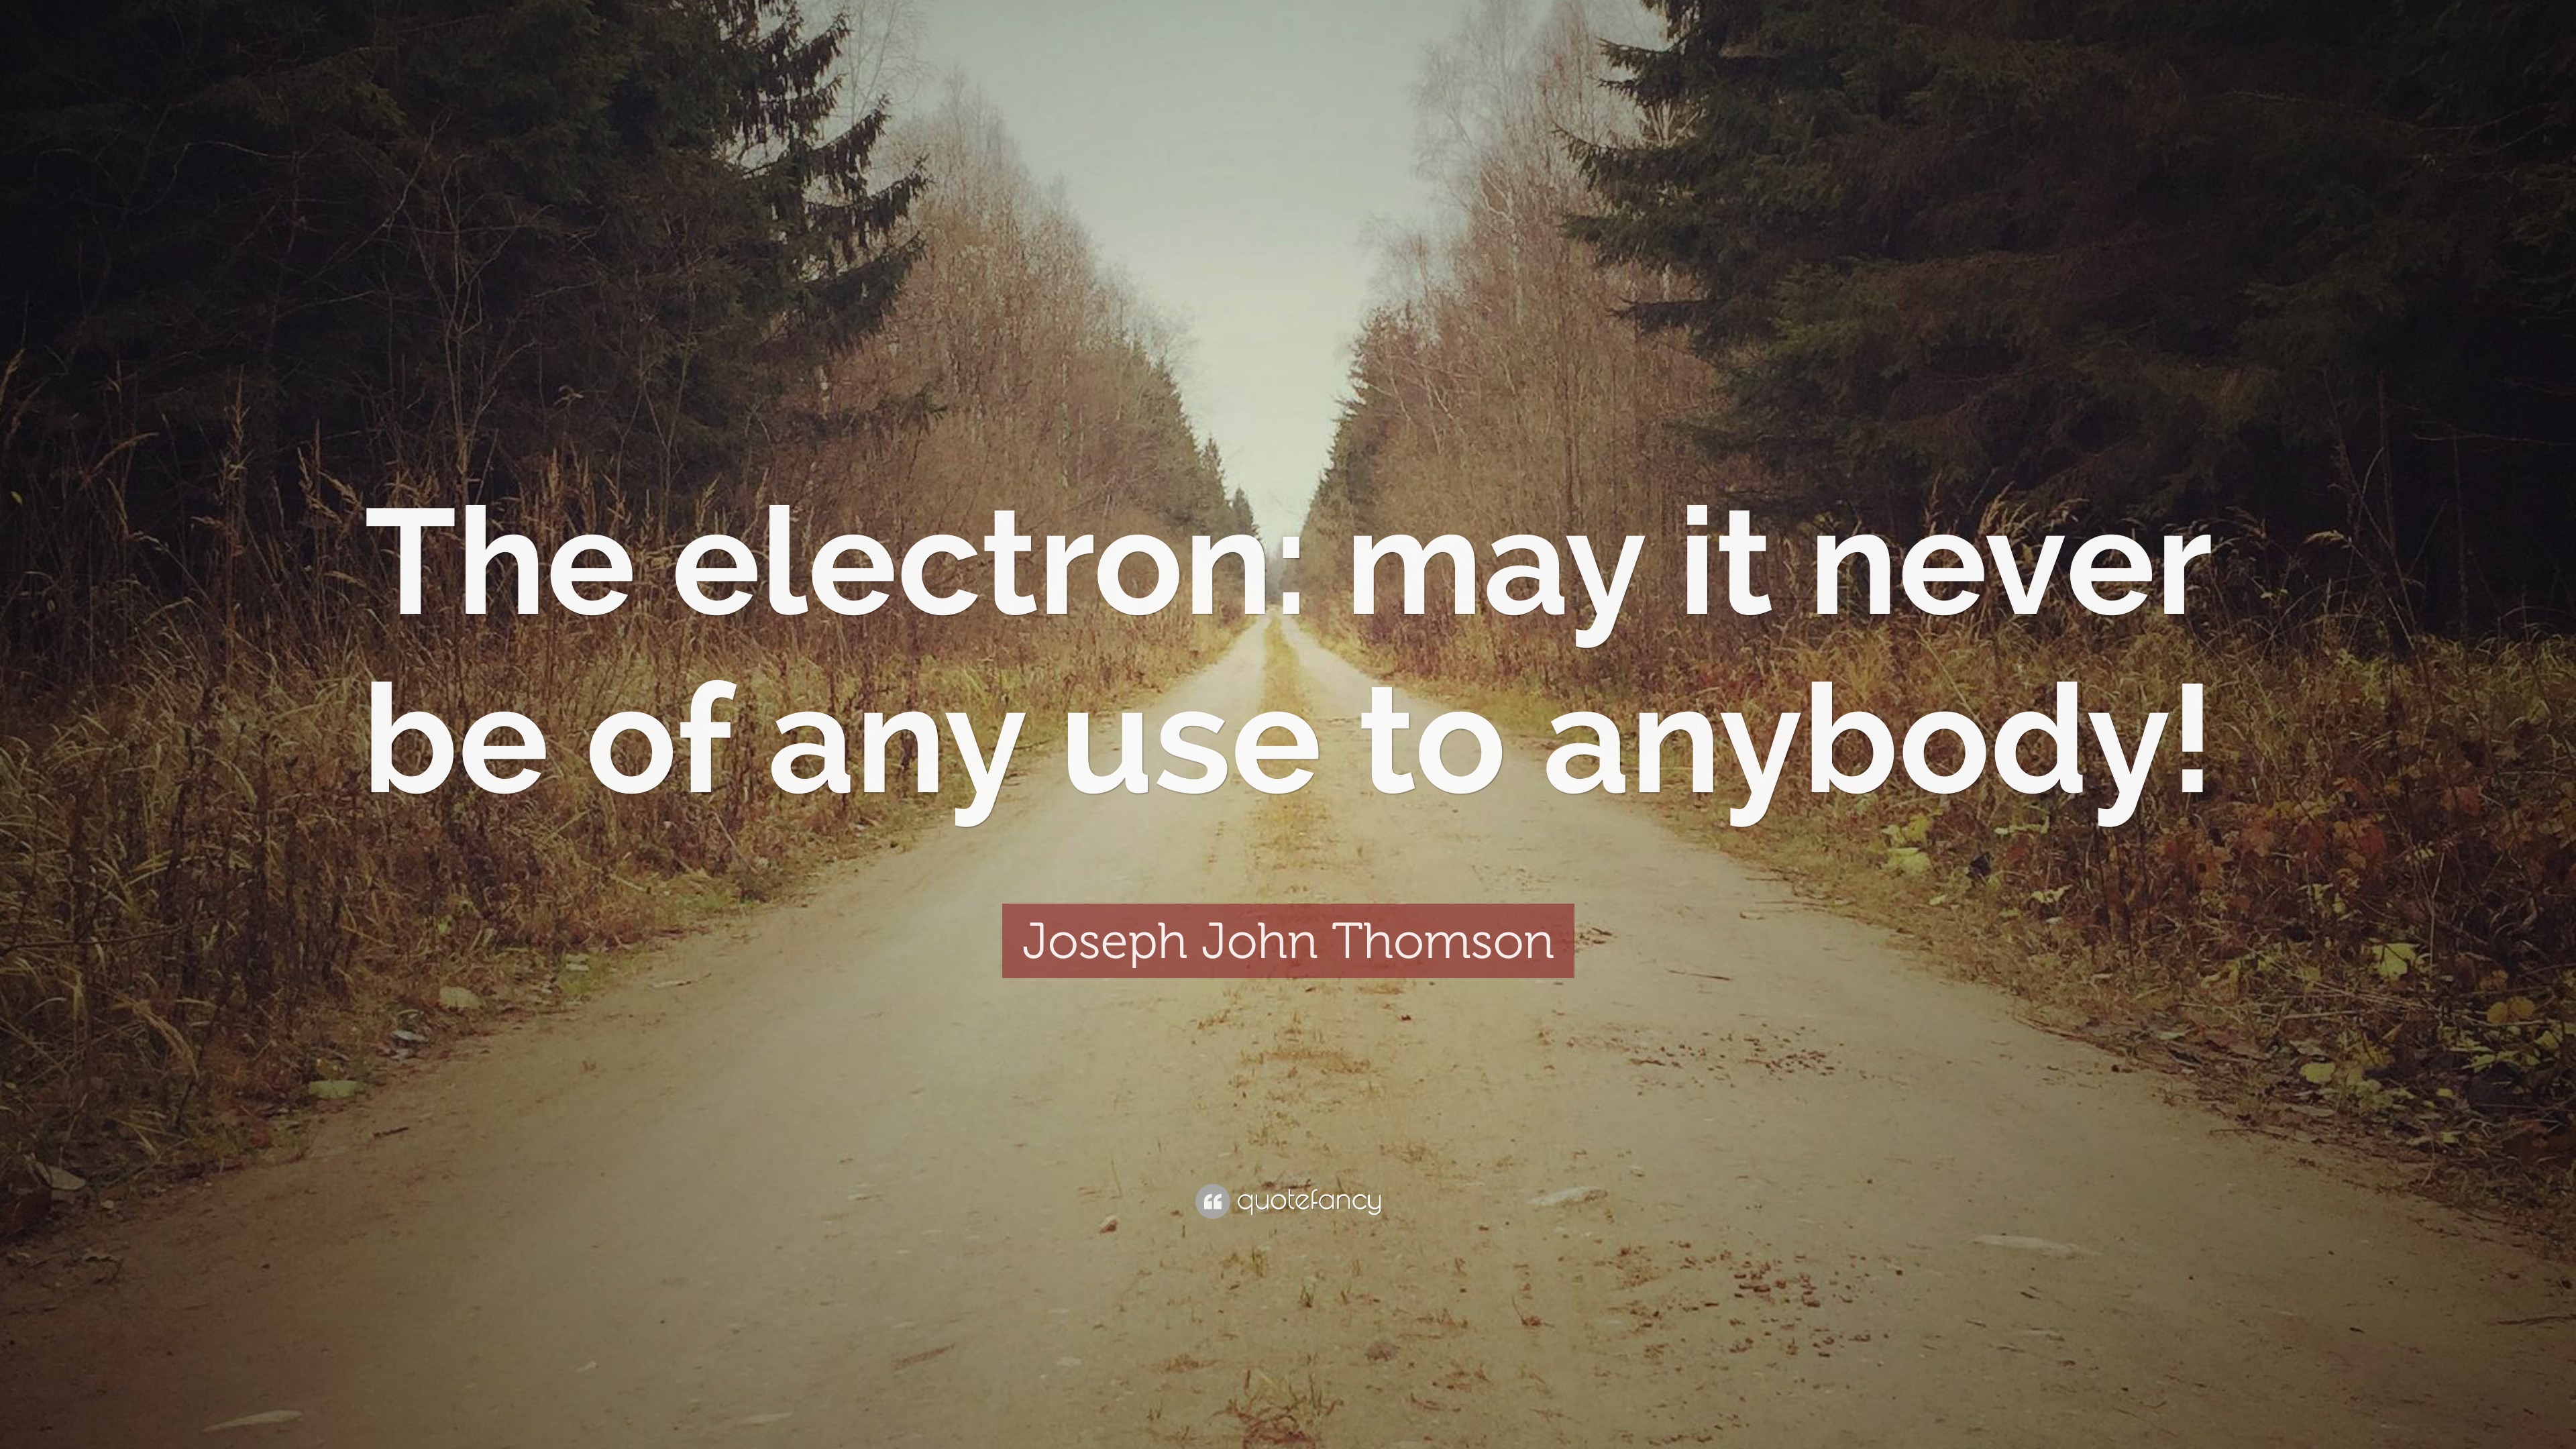 Joseph John Thomson Quote The Electron May It Never Be Of Any Use To Anybody